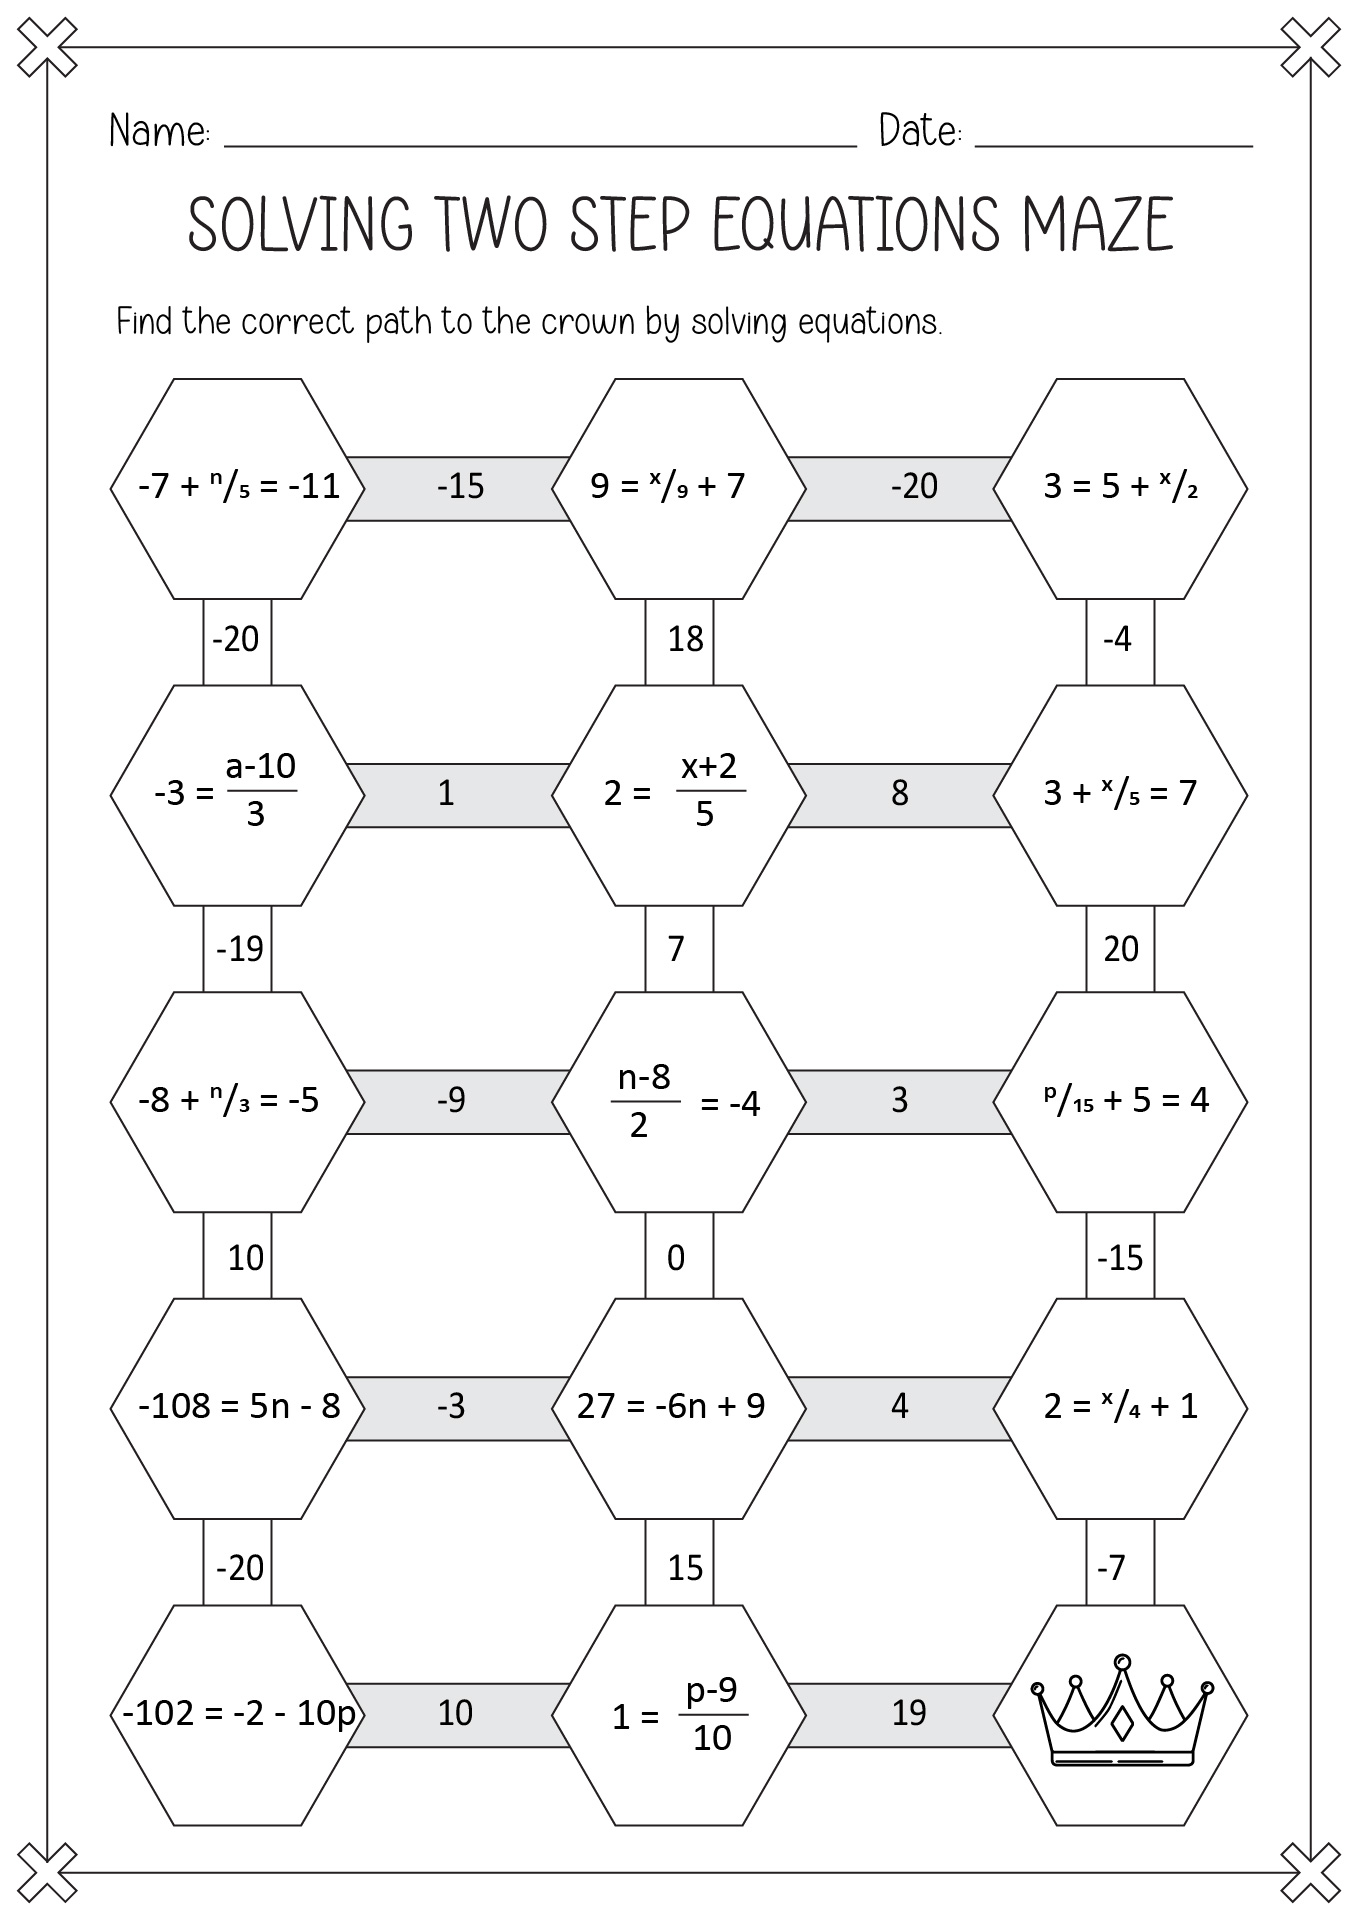 Solving Two-Step Equations Maze